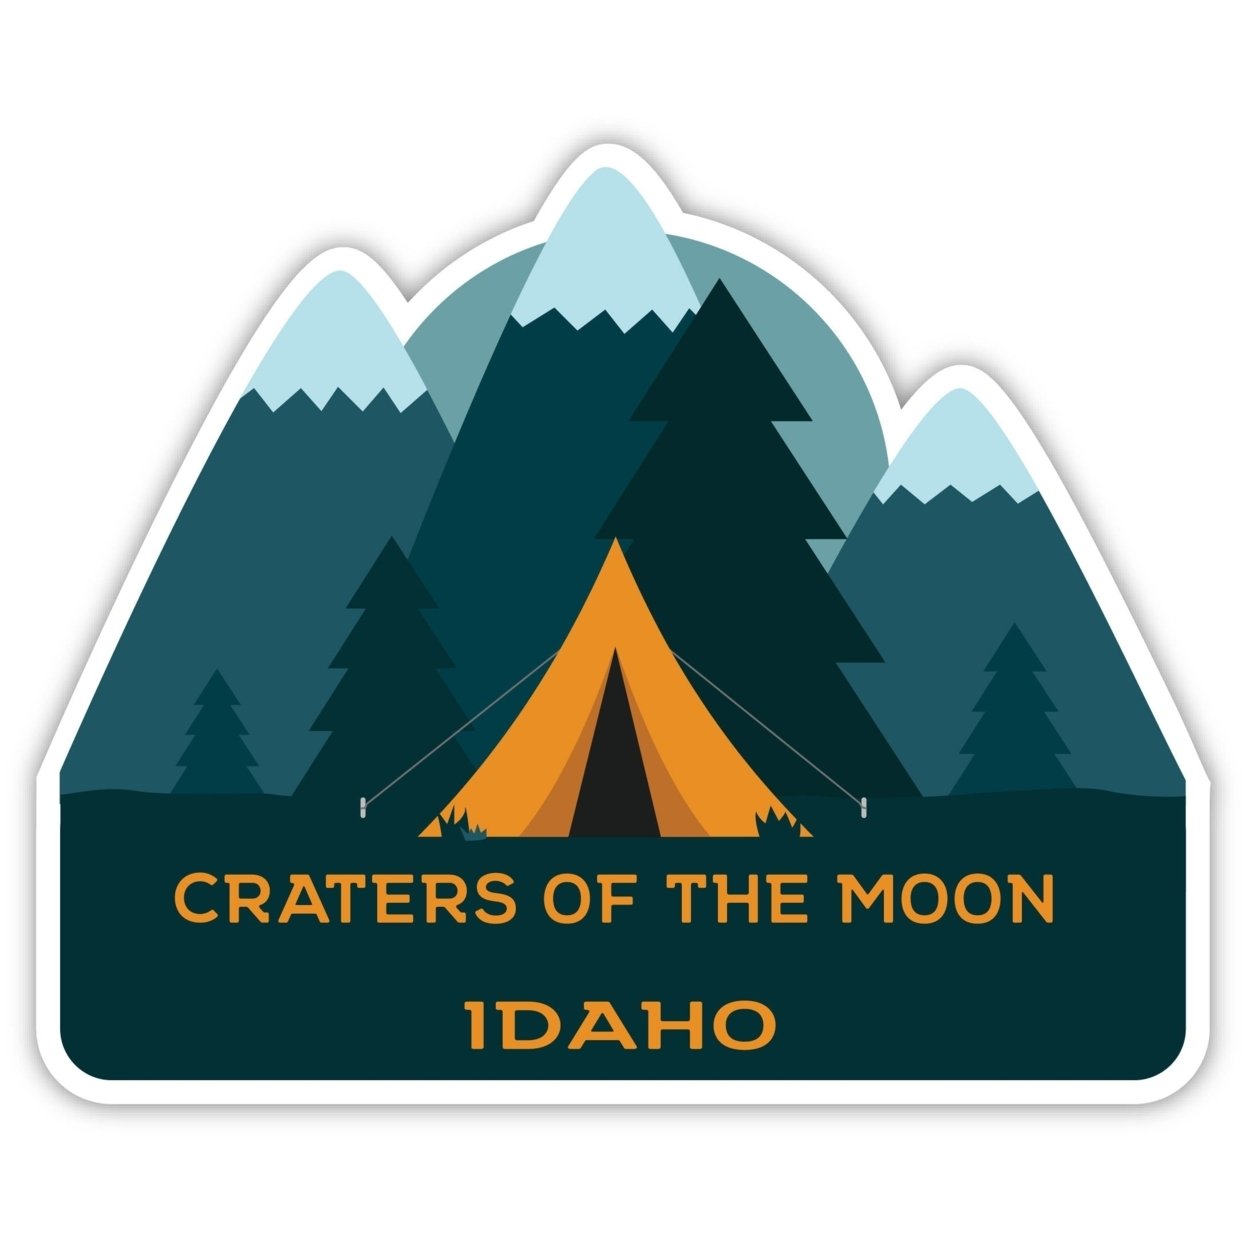 Craters Of The Moon Idaho Souvenir Decorative Stickers (Choose Theme And Size) - 4-Pack, 2-Inch, Tent